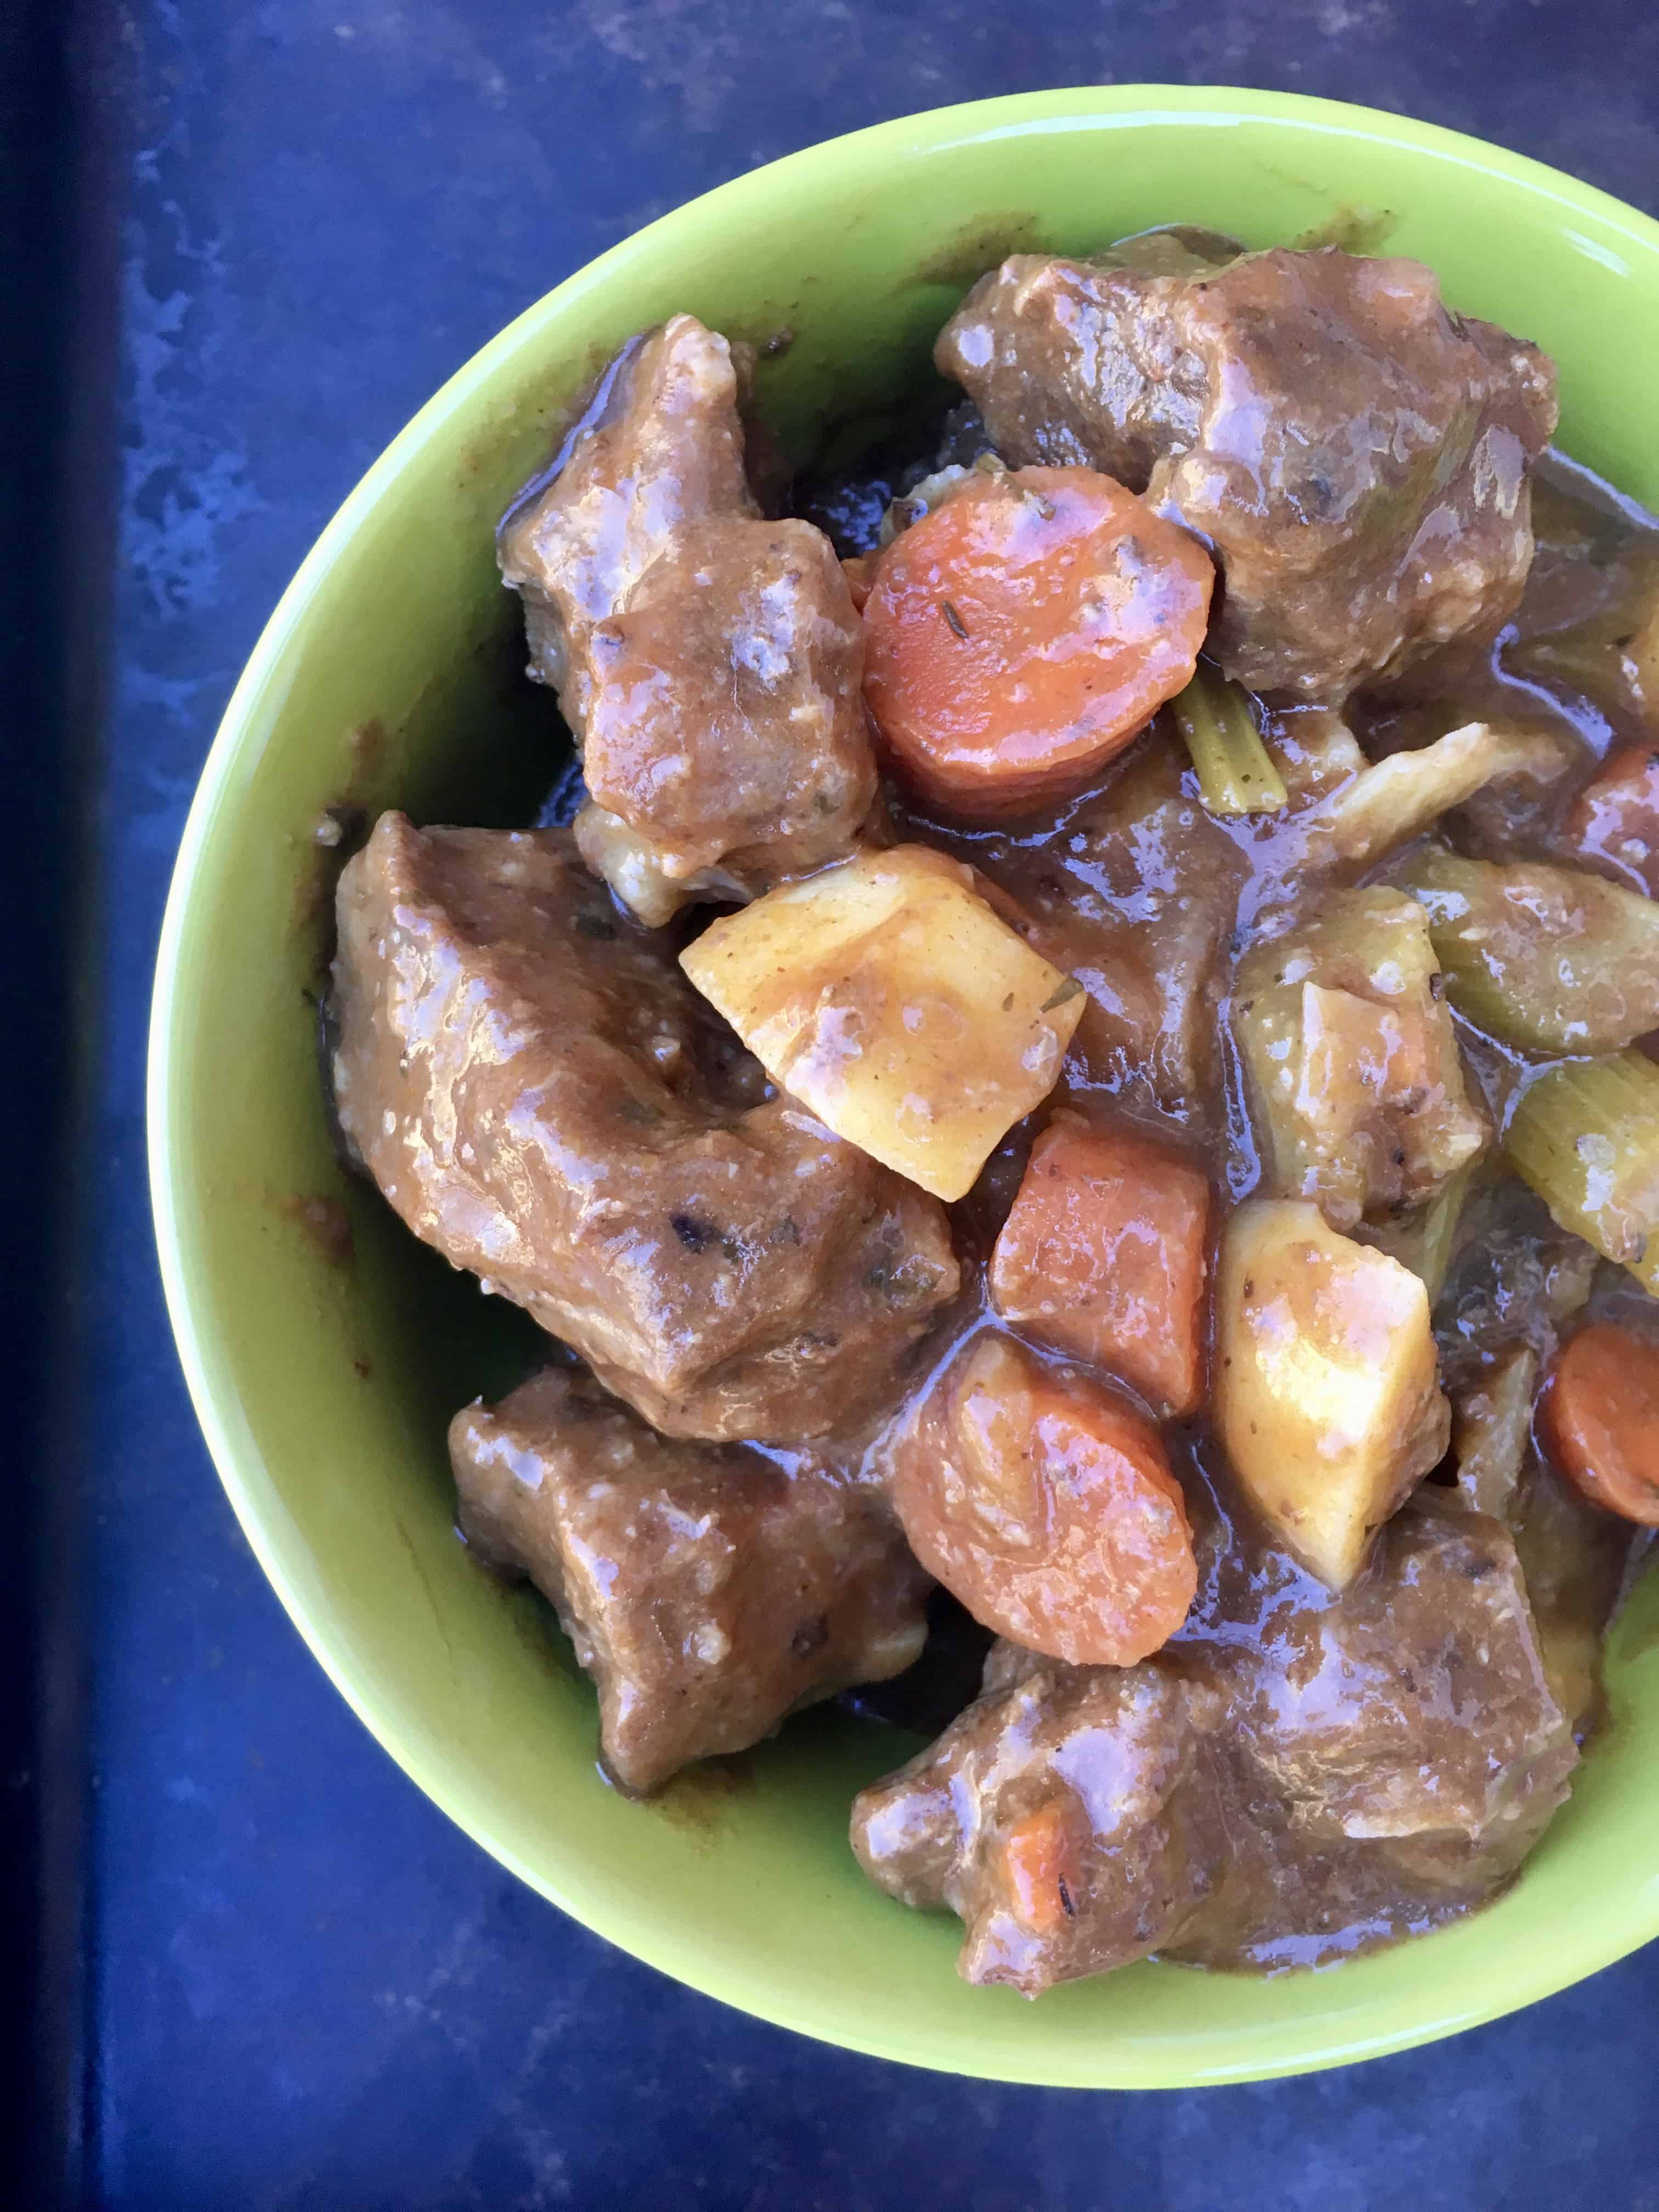 Instant Pot Beef Stew in a green bowl